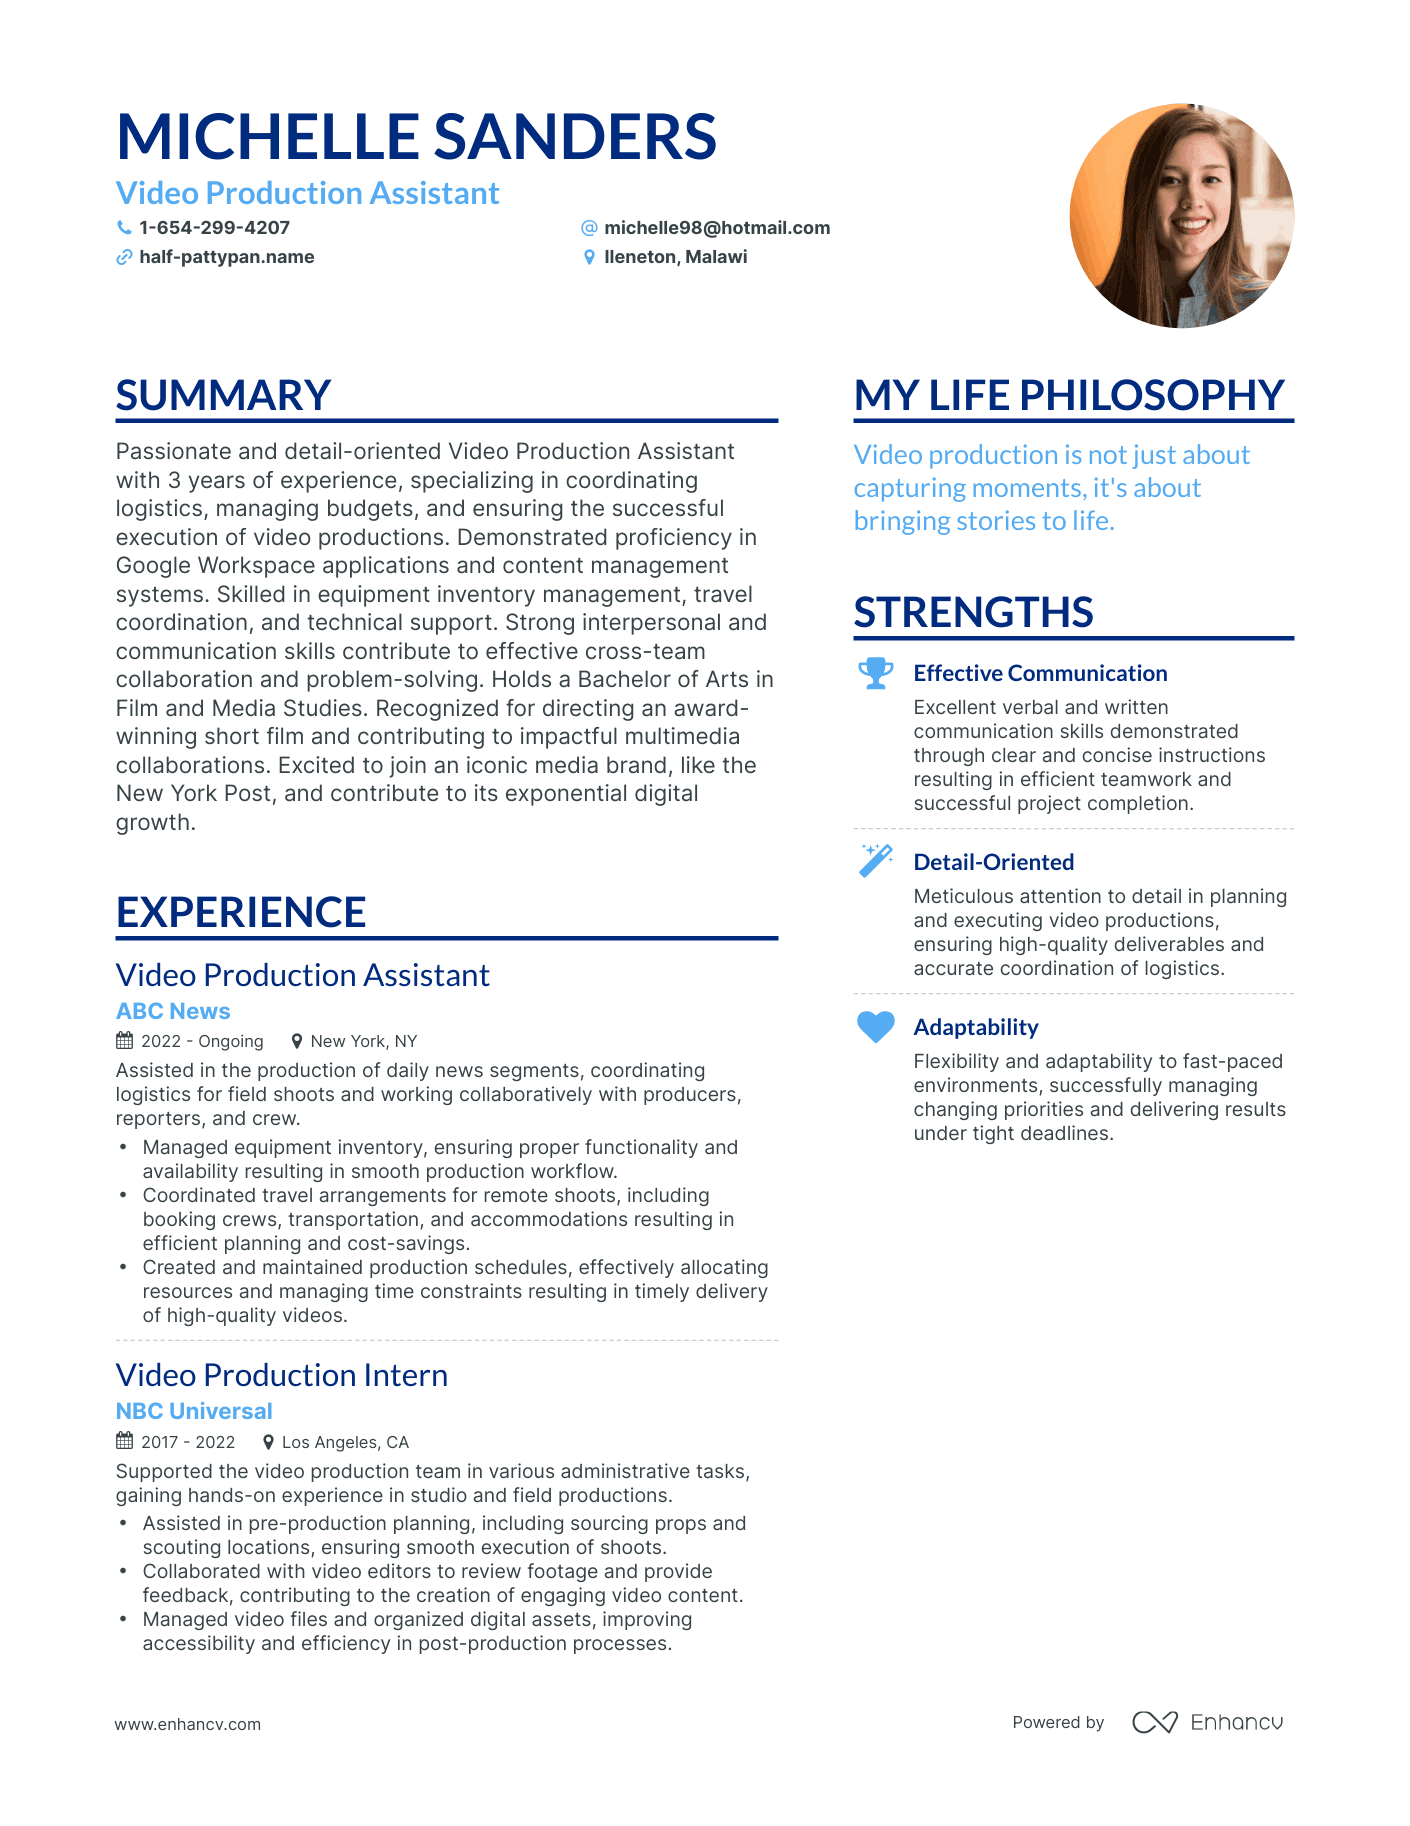 Video Production Assistant resume example